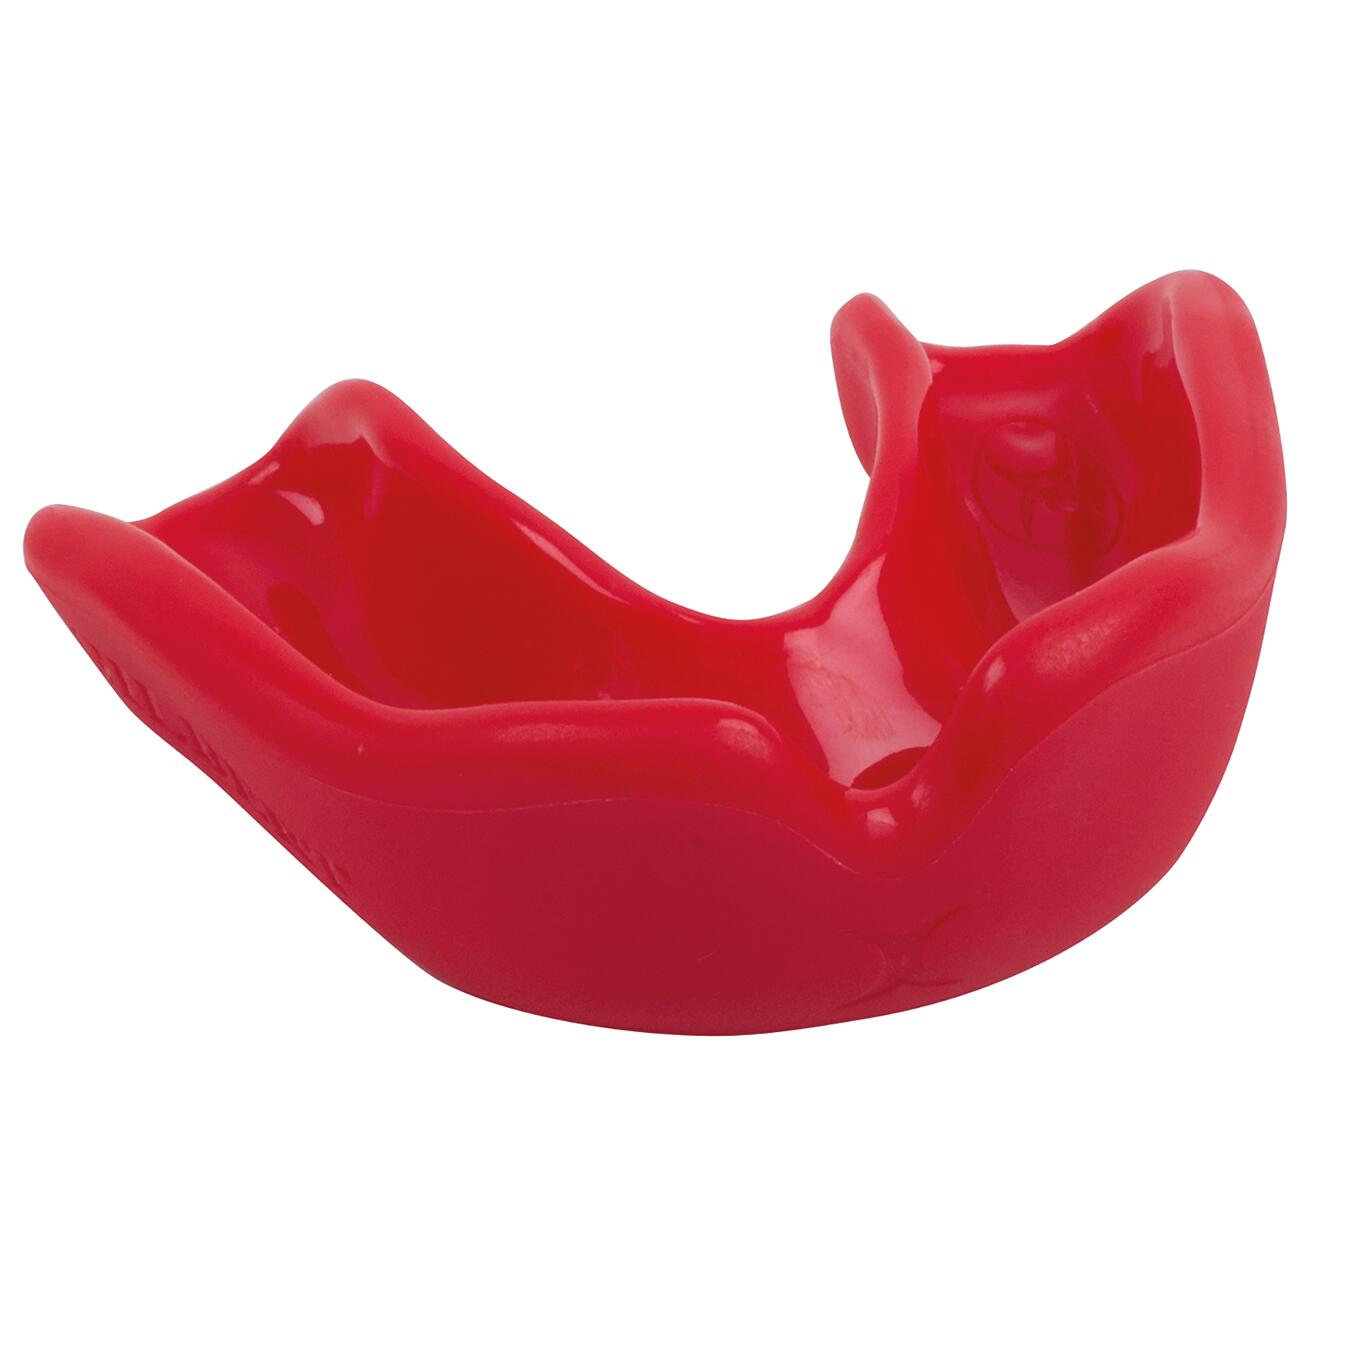 Academy Mouthguard - Black - Adult 2/3